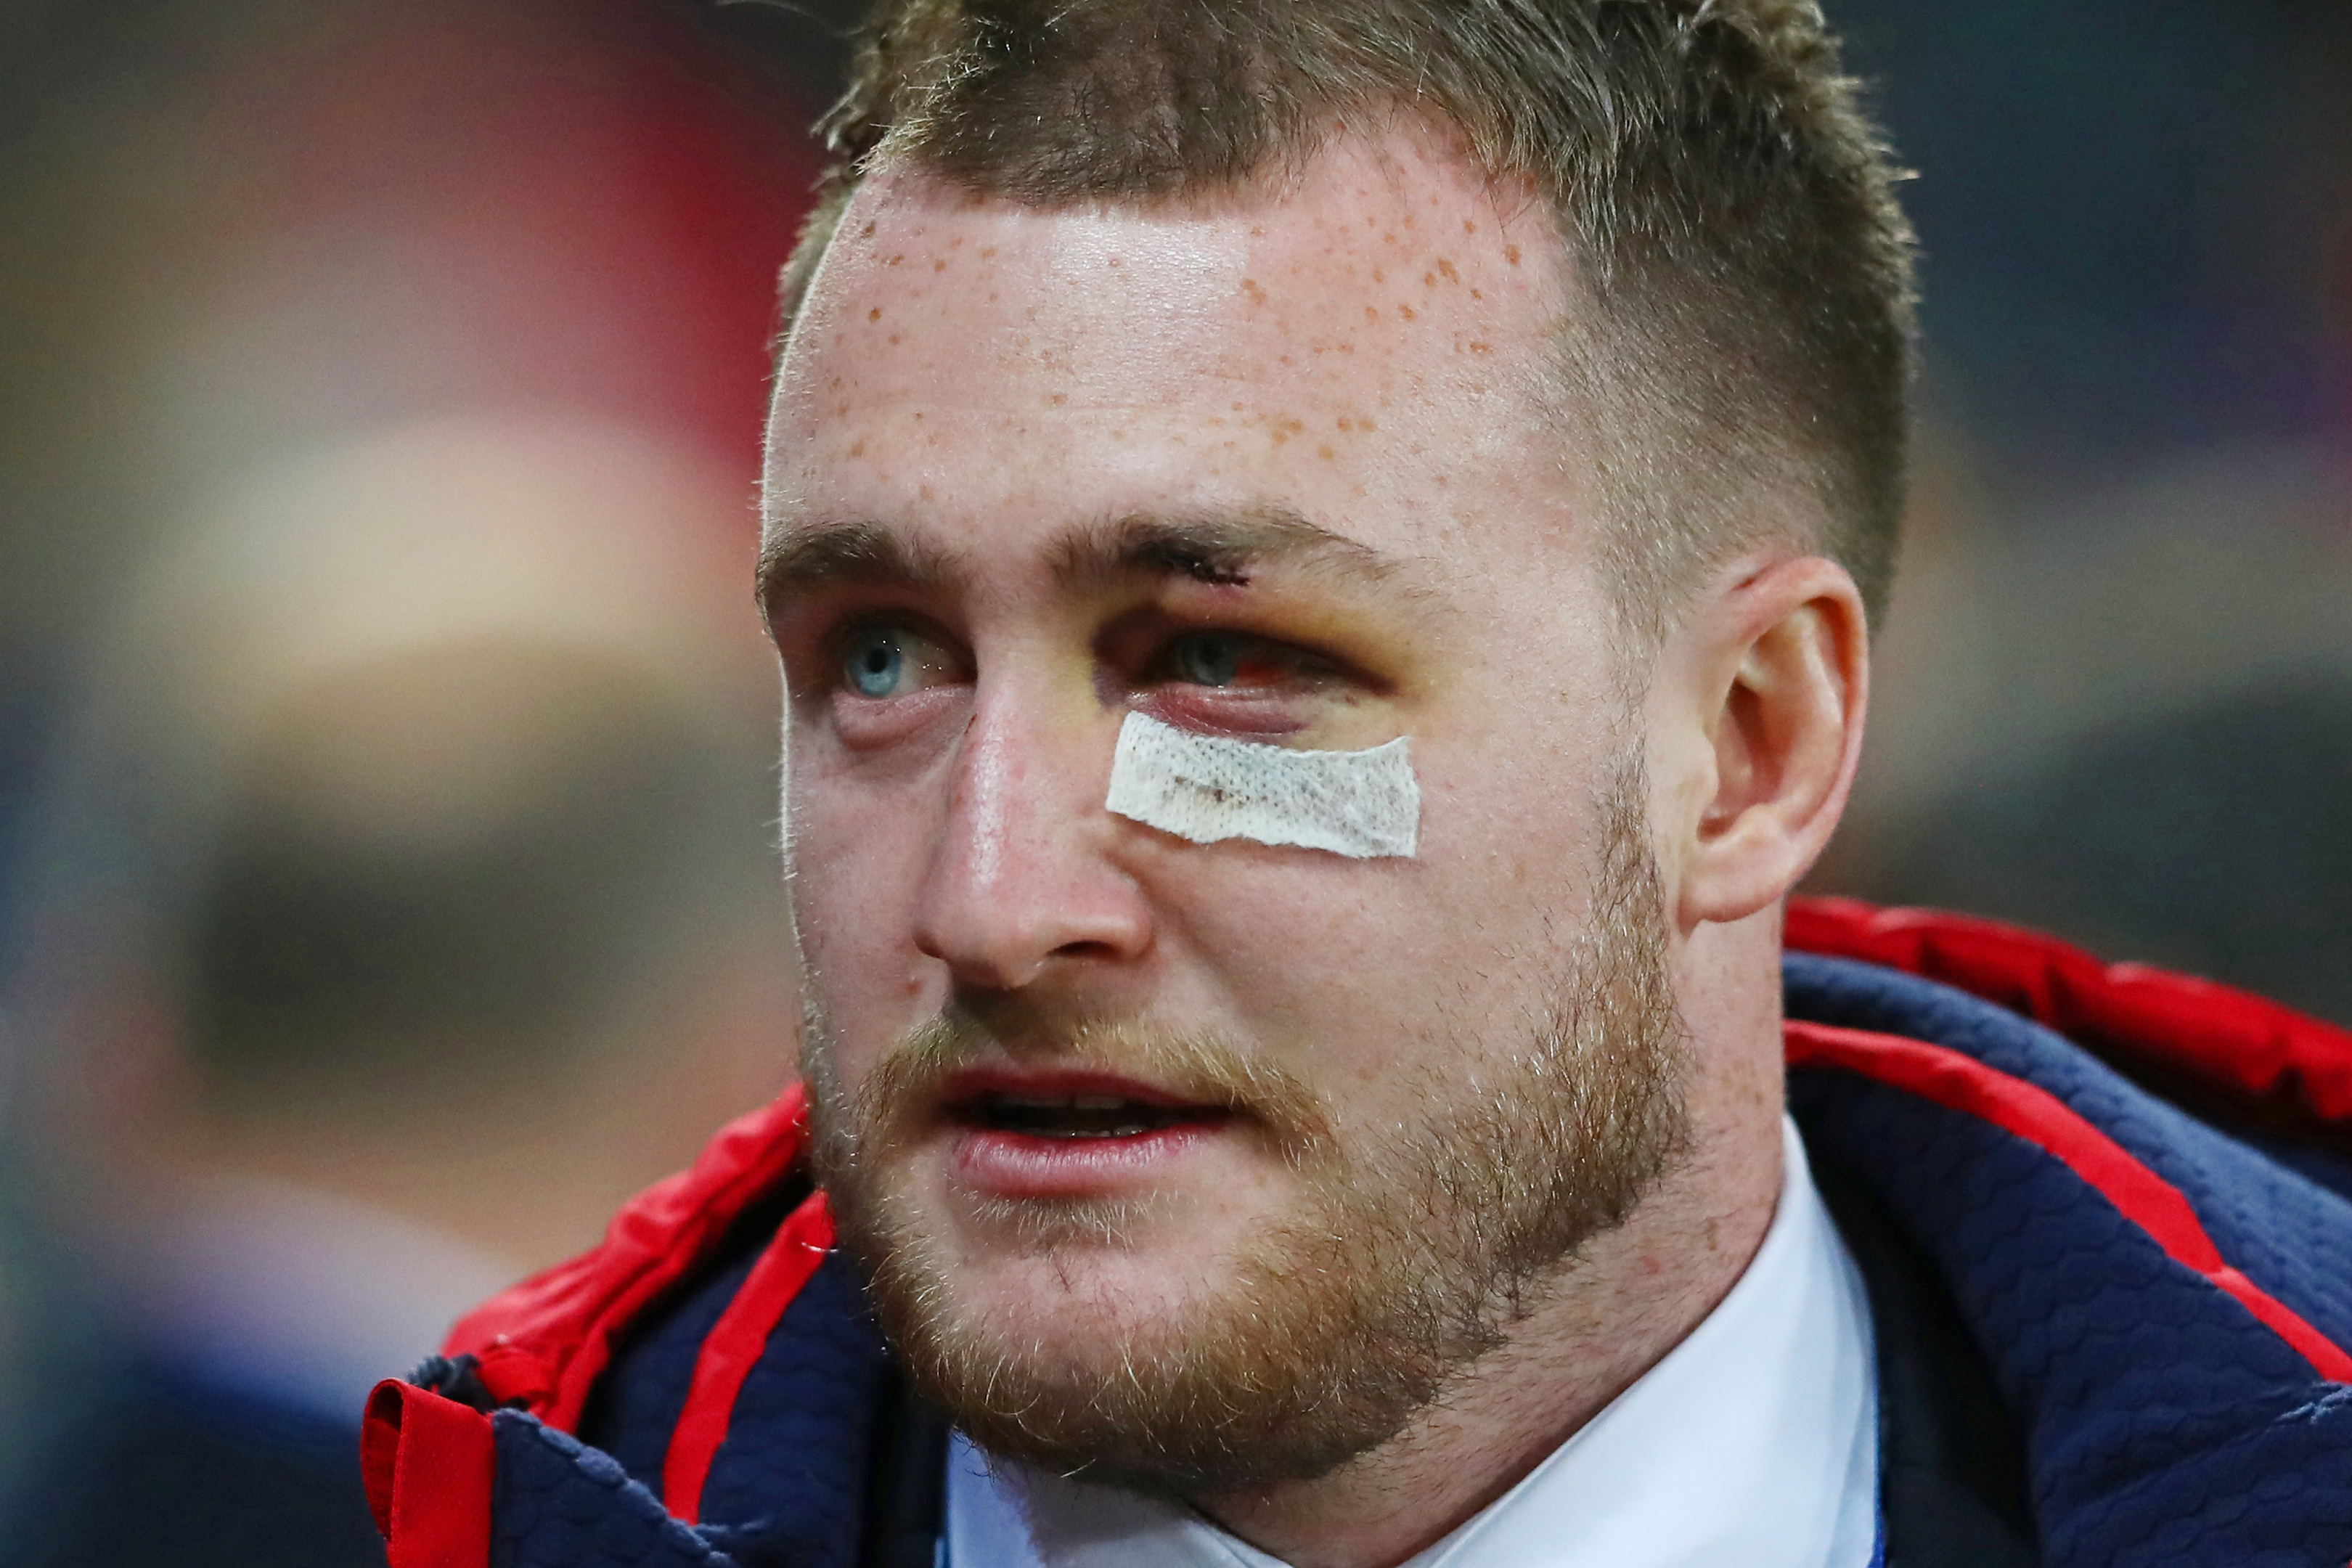 DUNEDIN, NEW ZEALAND - JUNE 13:  The injured Stuart Hogg of the Lions looks on prior to kickoff during the 2017 British & Irish Lions tour match between the Highlanders and the British & Irish Lions at the Forsyth Barr Stadium on June 13, 2017 in Dunedin, New Zealand.  (Photo by David Rogers/Getty Images)